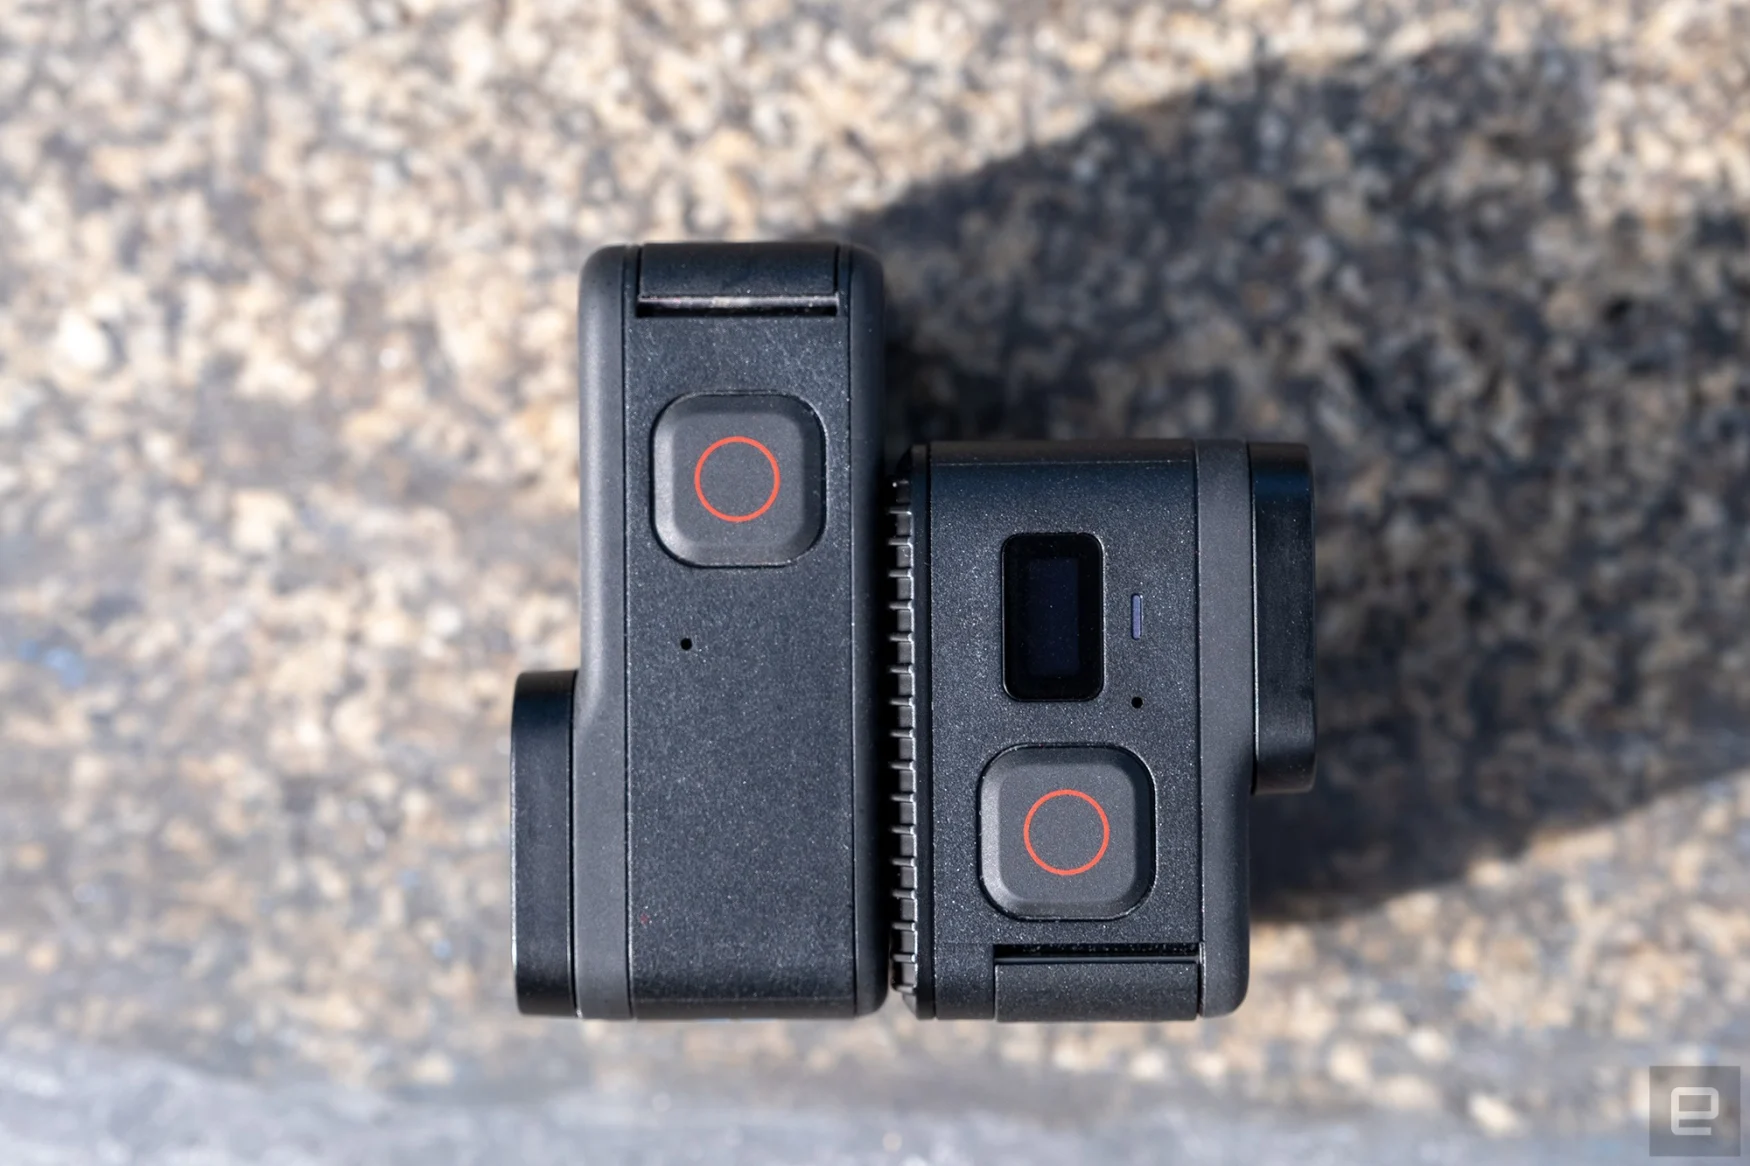 Both the regular GoPro Hero 11 Black and the Mini are pictured back to back for size comparison.